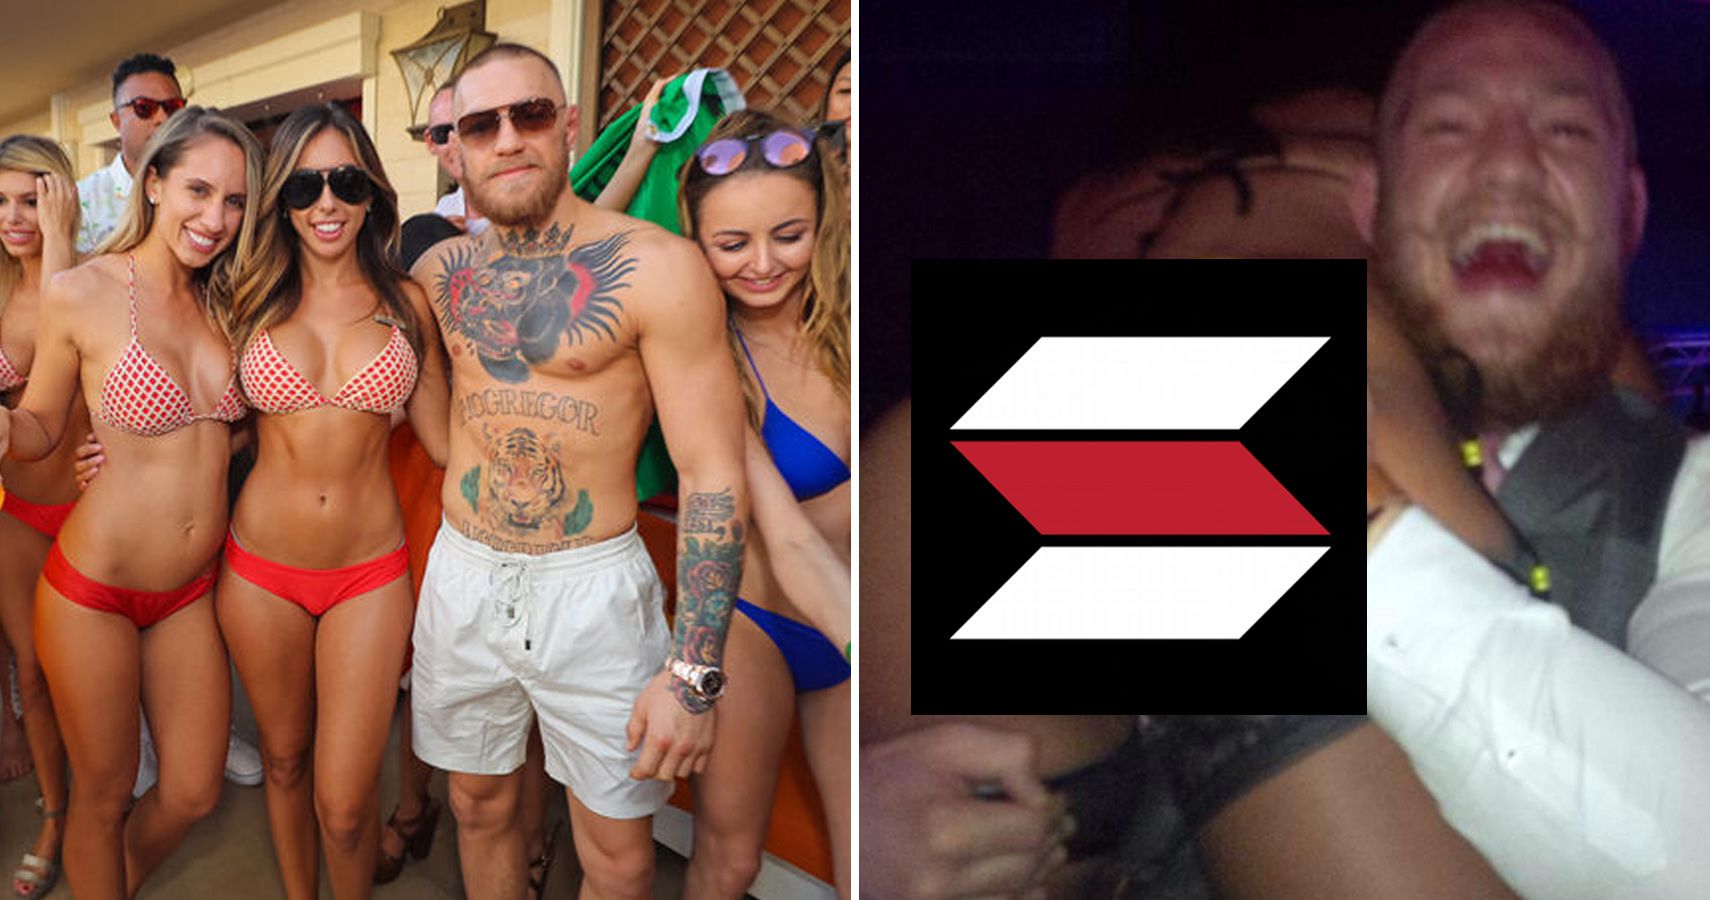 15 Pictures The UFC Doesn't Want You To See of Conor McGregor